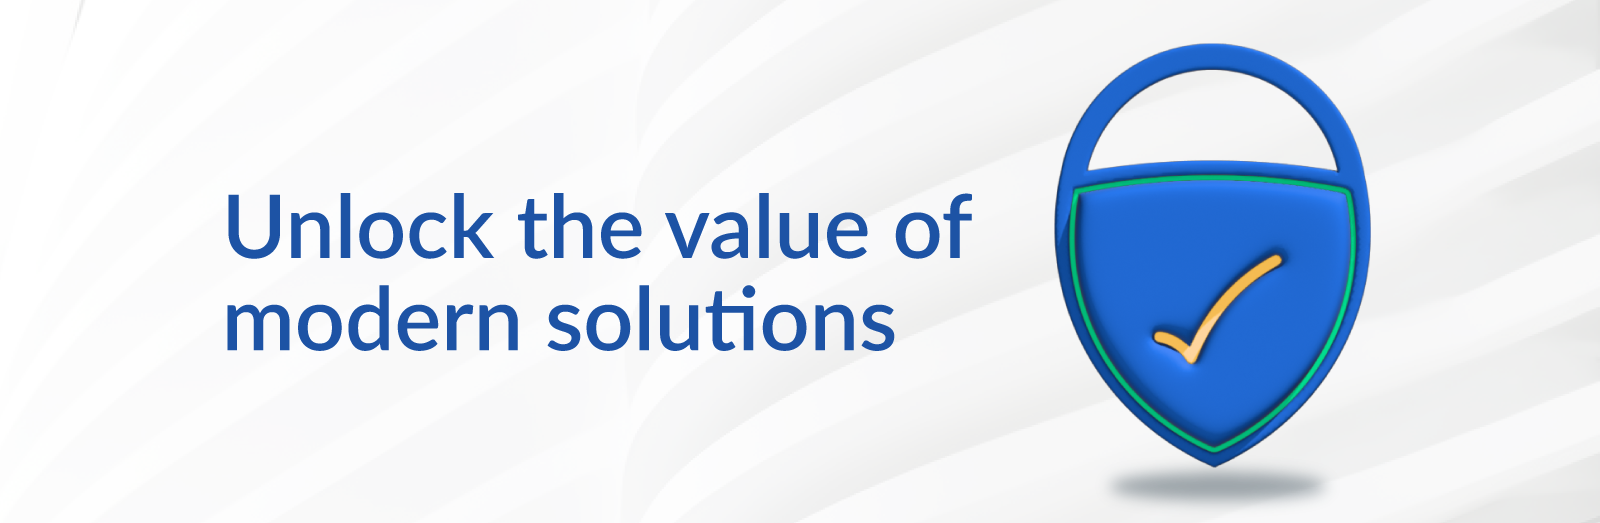 Unlocking the value of modern solutions